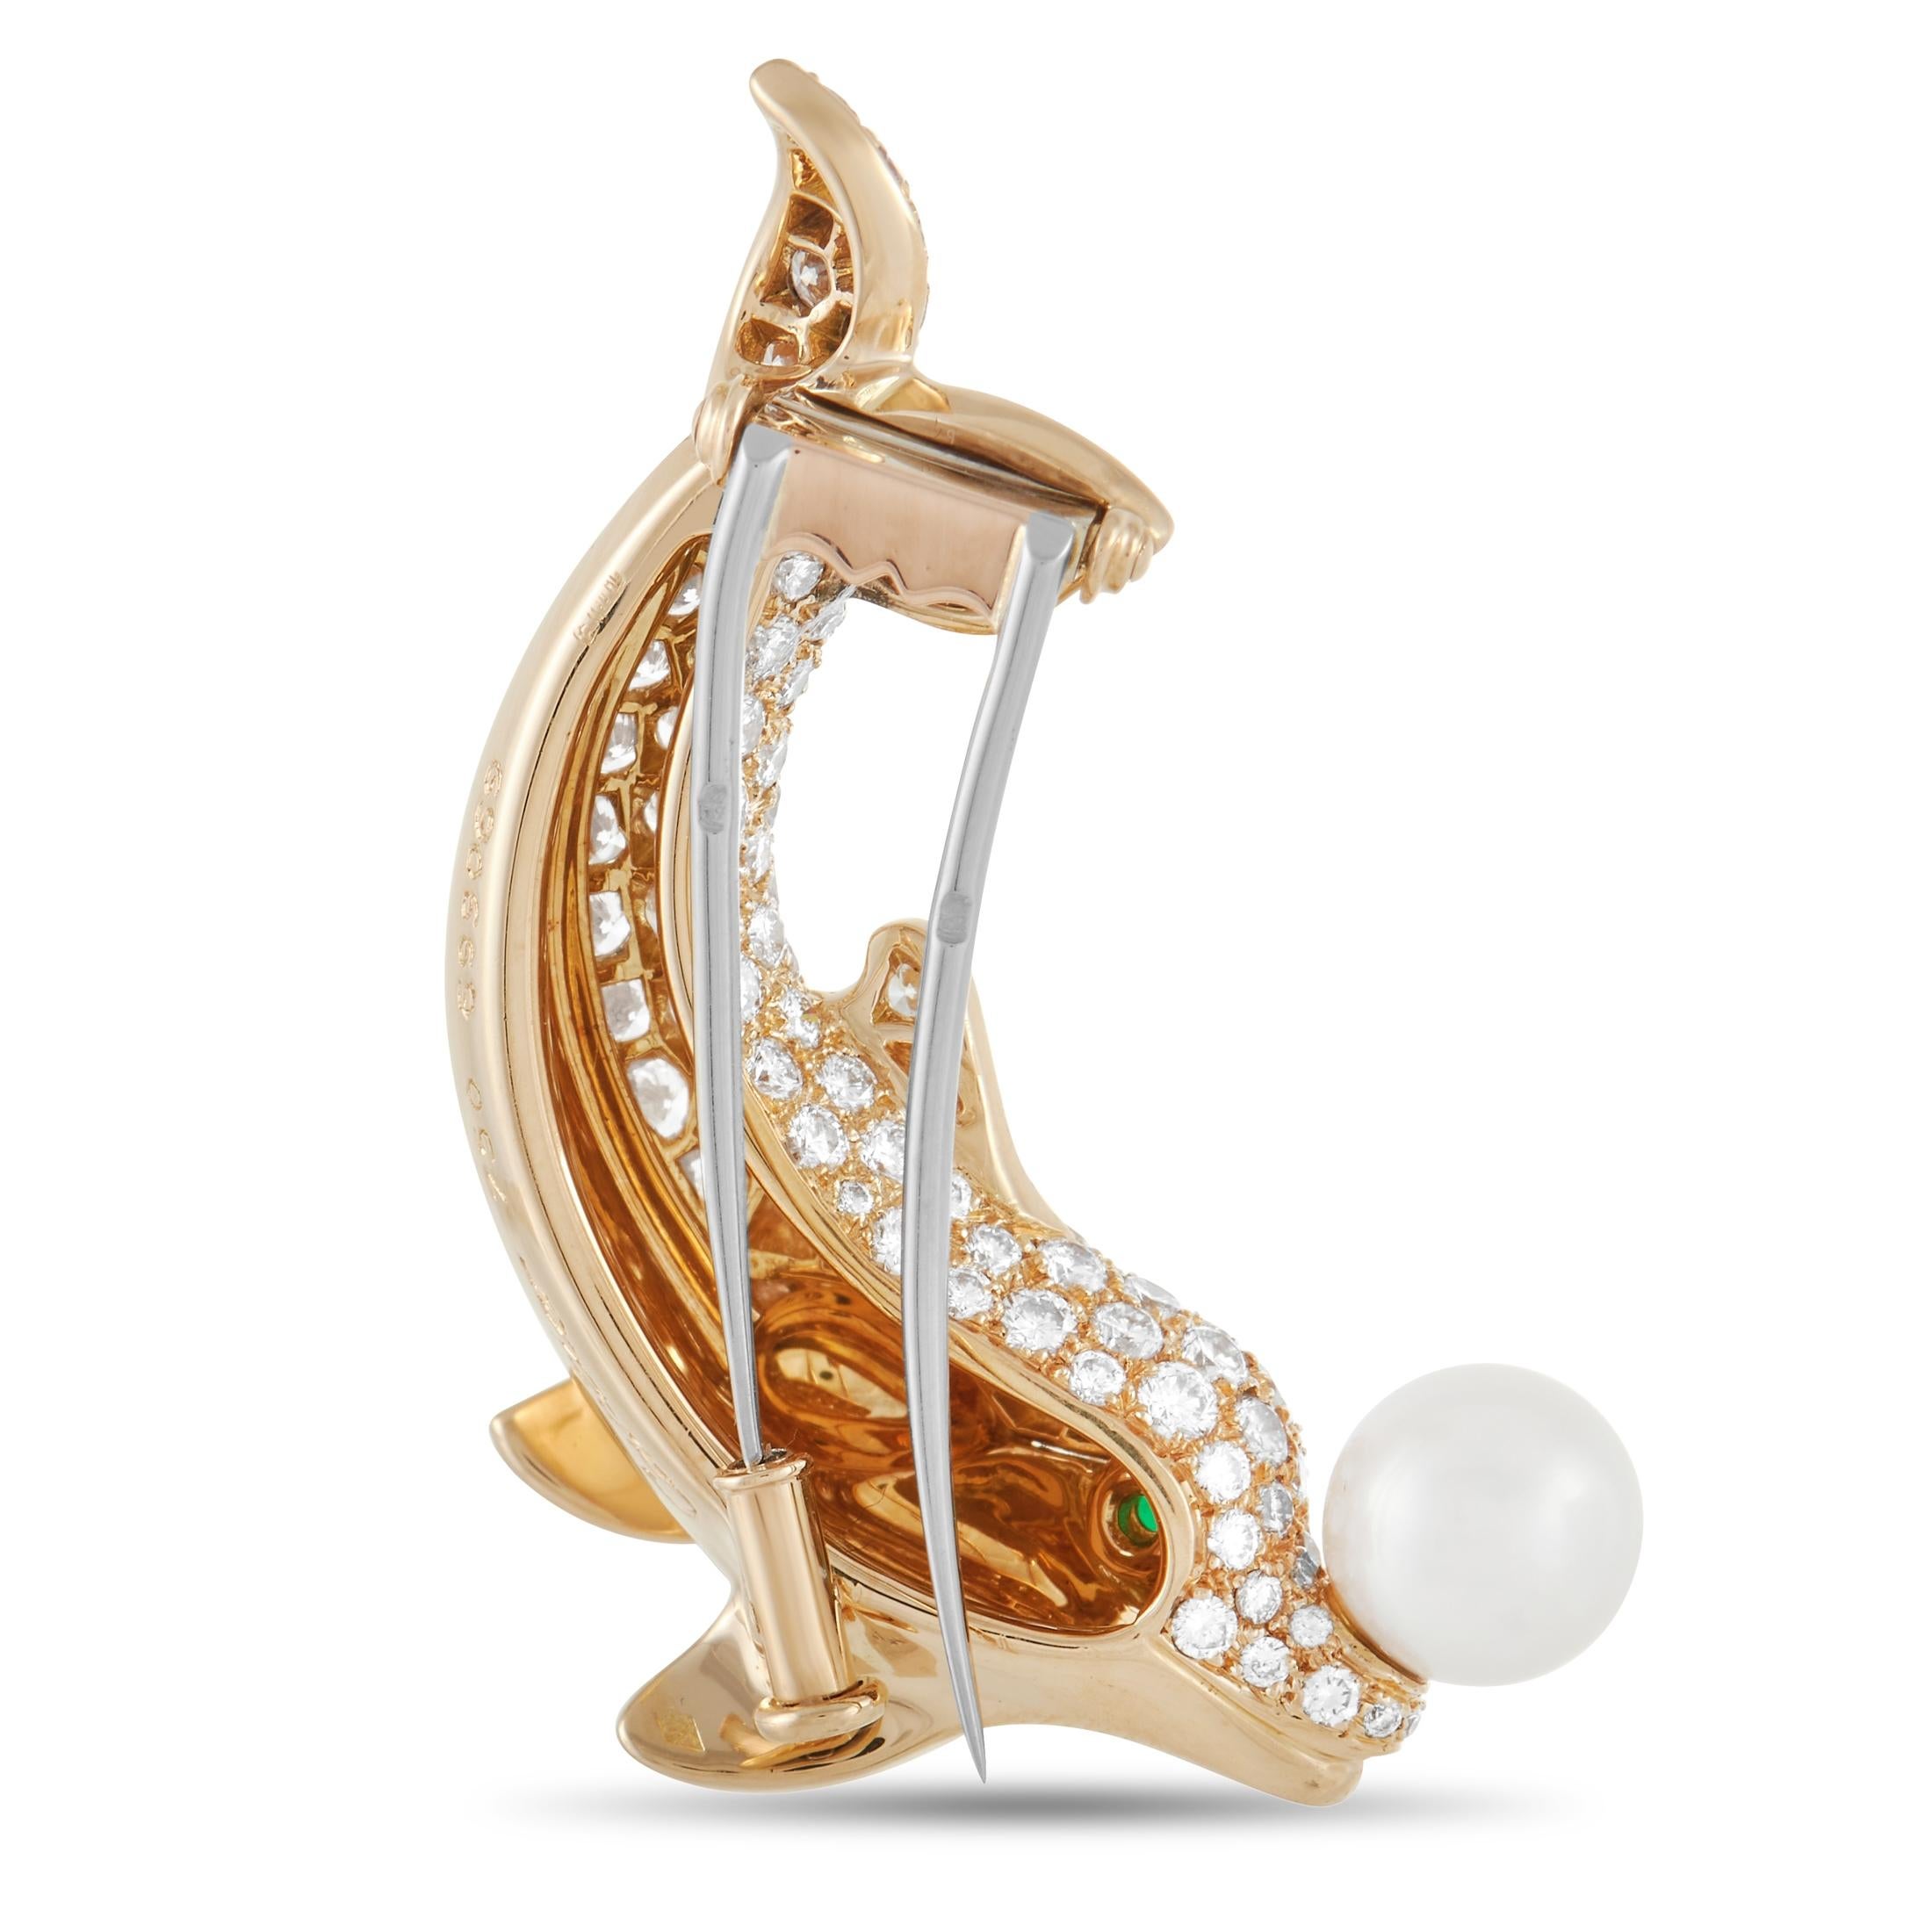 There’s something inherently whimsical about this charming Cartier brooch. The 18K yellow gold dolphin makes a statement thanks to inset diamond gemstones with a total weight of 2.10 carats. Emerald eyes and a pearl accent add a fabulous finishing